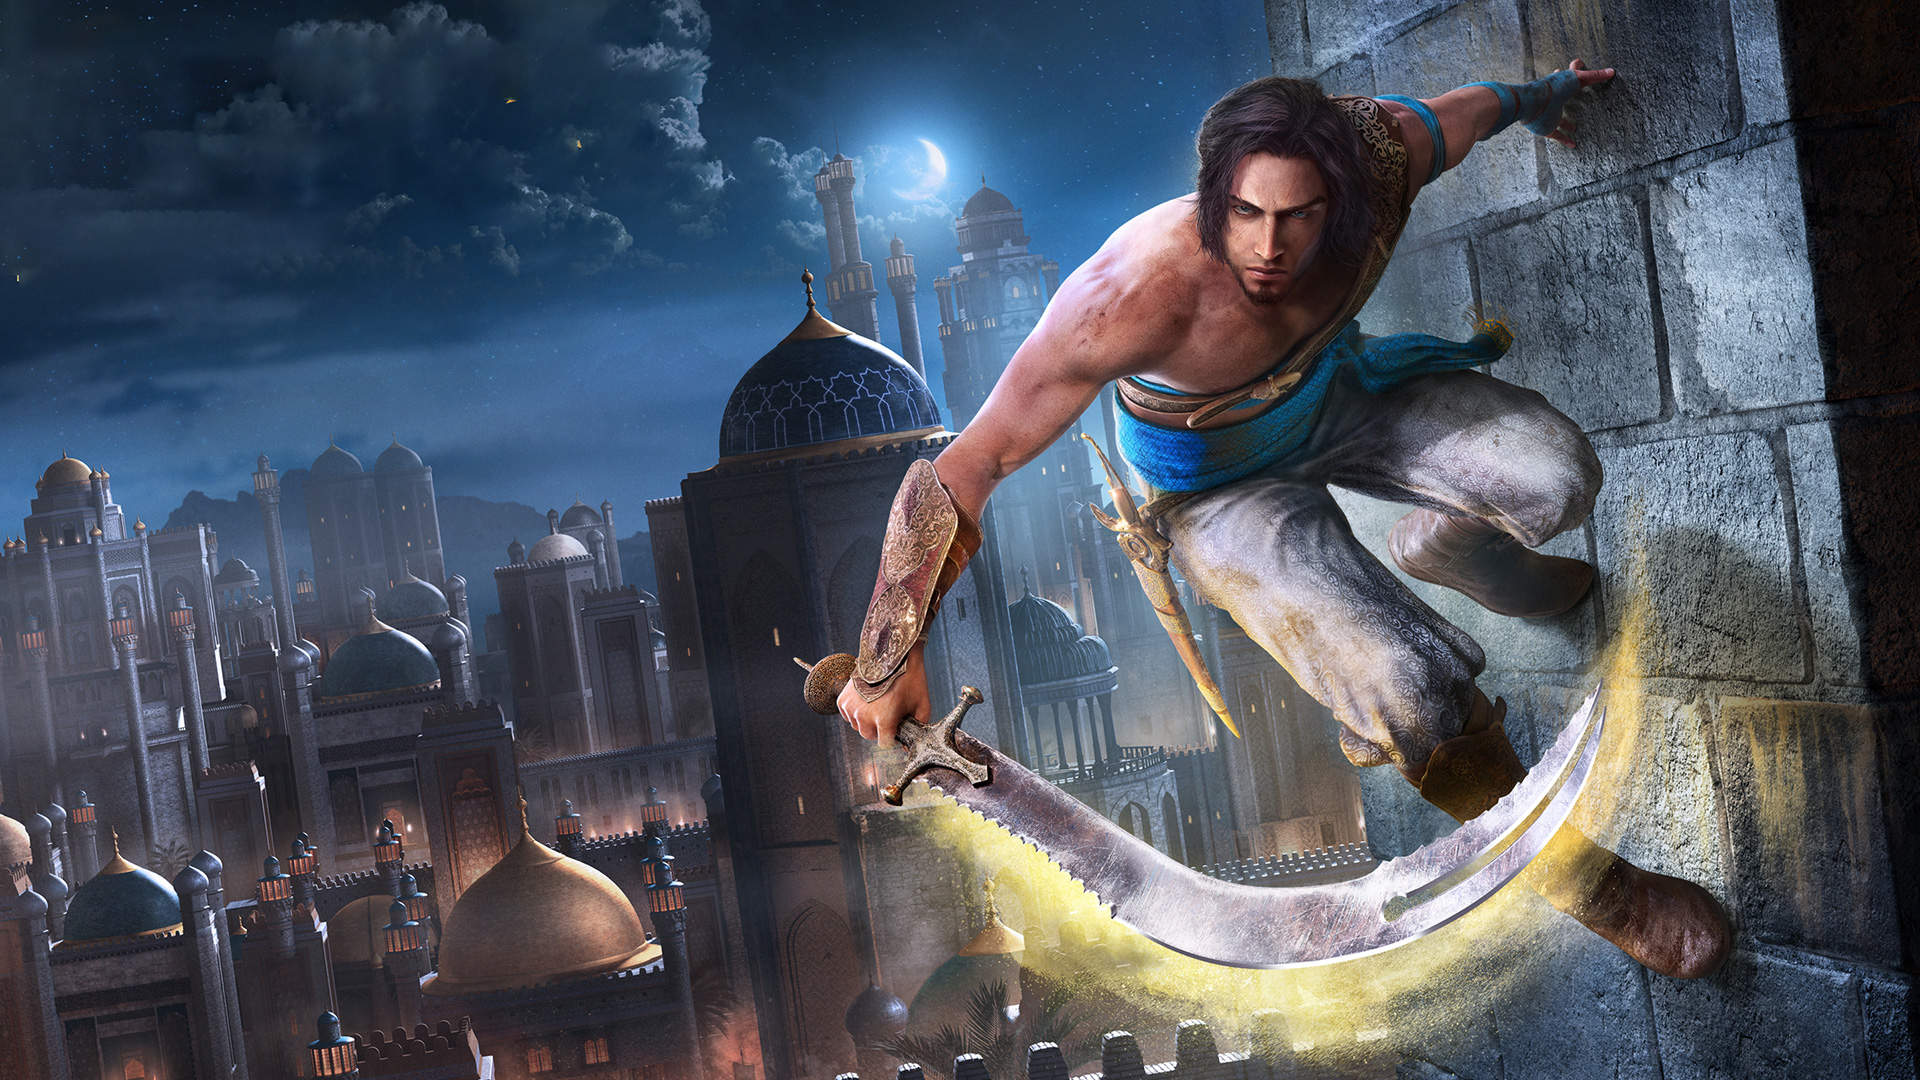 Prince of Persia: The Sands of Time Remake